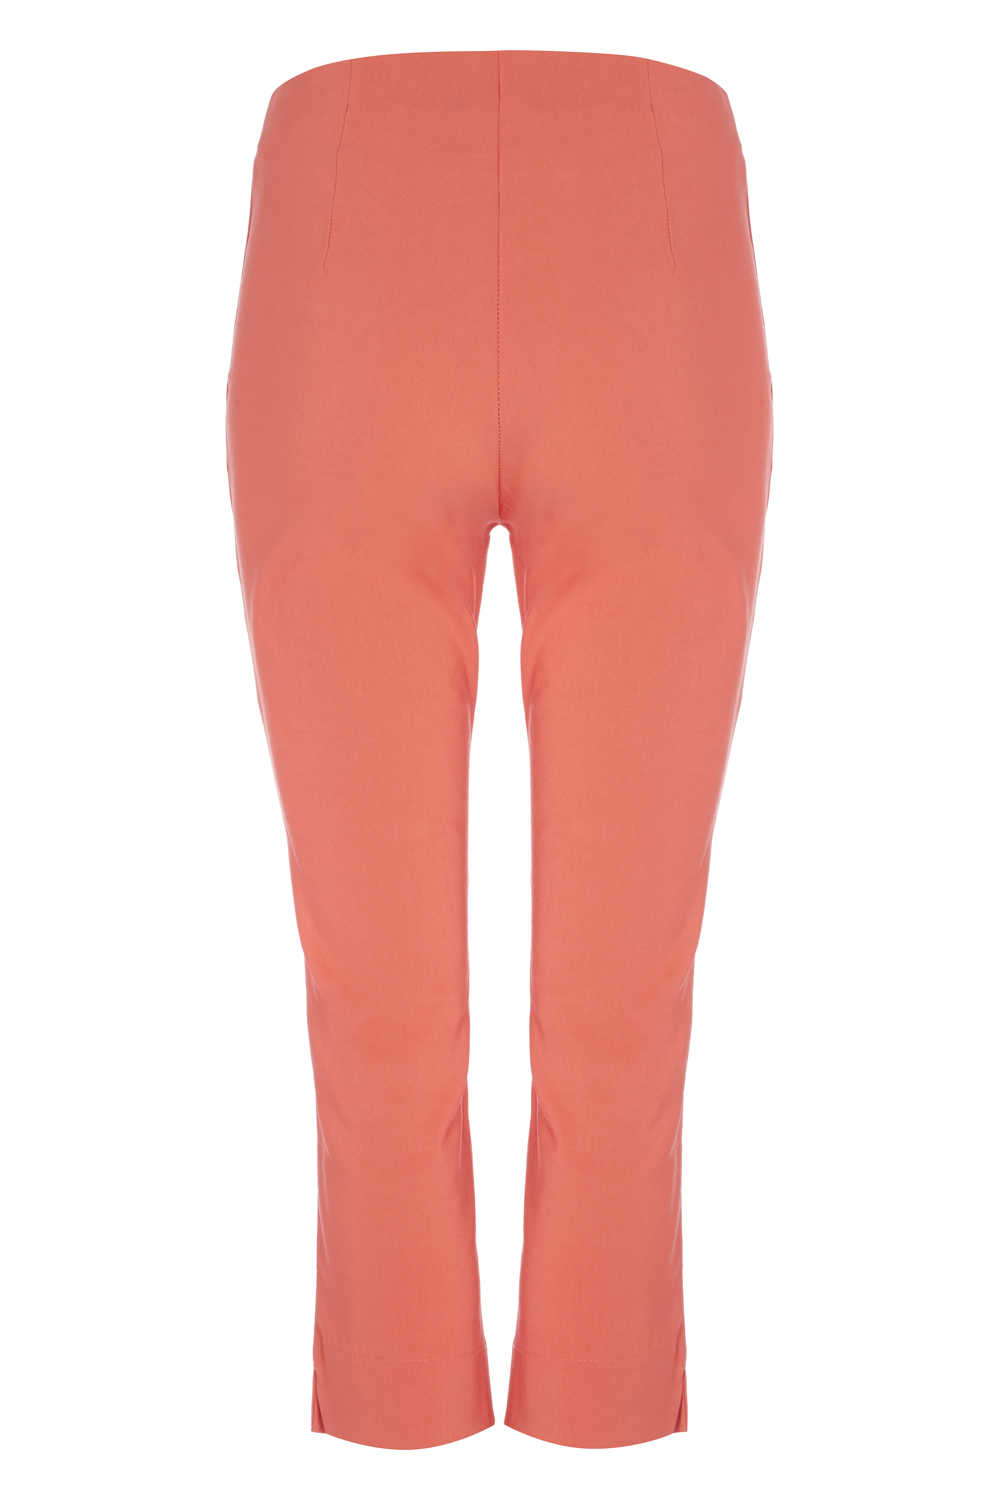 Bengaline Cropped Trousers in Coral - Roman Originals UK